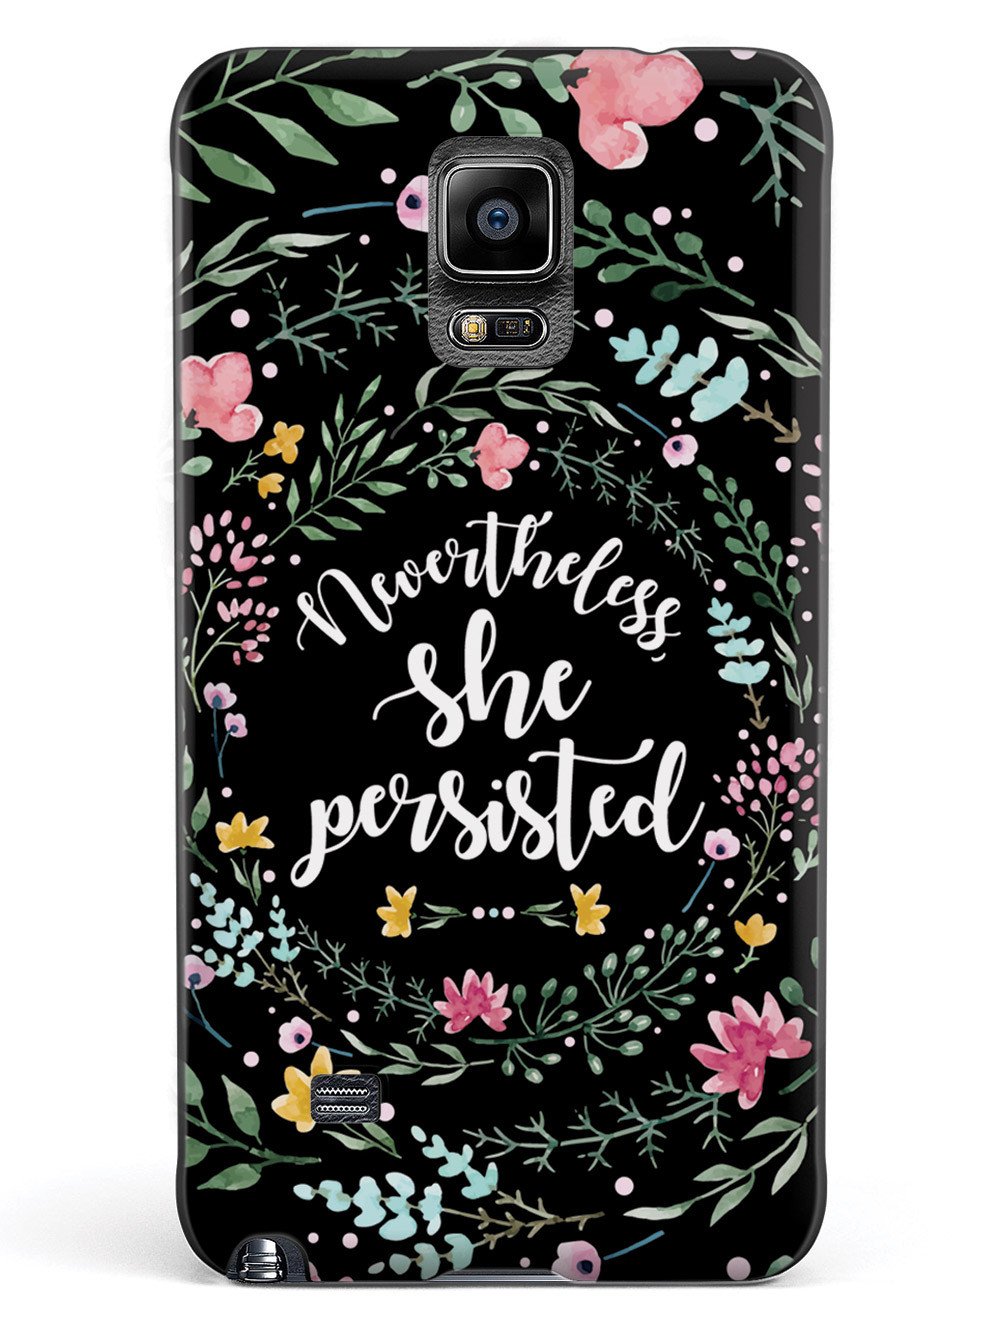 Nevertheless, She Persisted - Watercolor Flower Wreath - Black Case - pipercleo.com